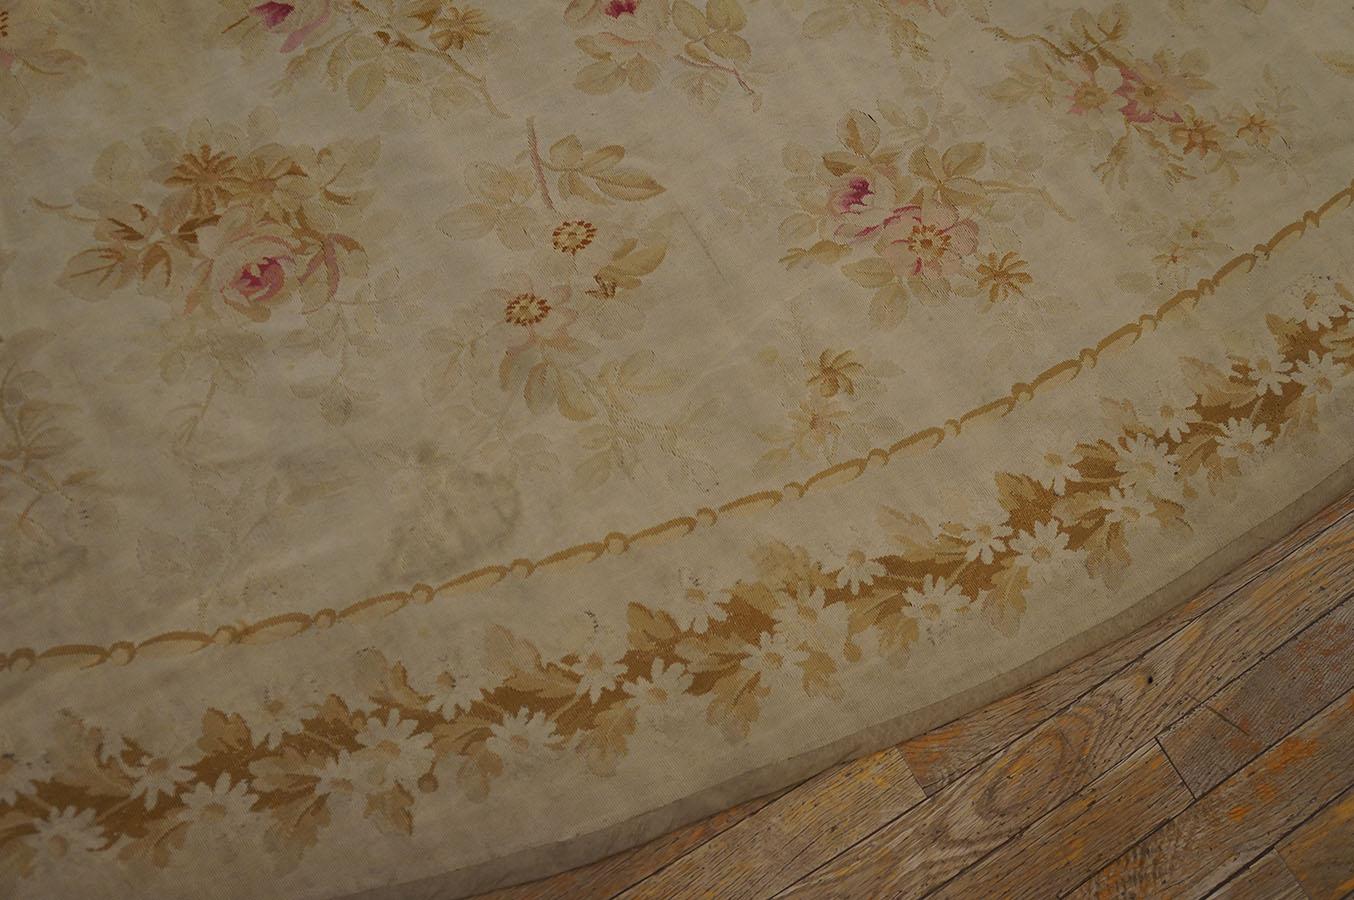 Late 19th Century French Aubusson Carpet ( 8' 4'' x 13' 4'' - 255 x 405 cm )  For Sale 11